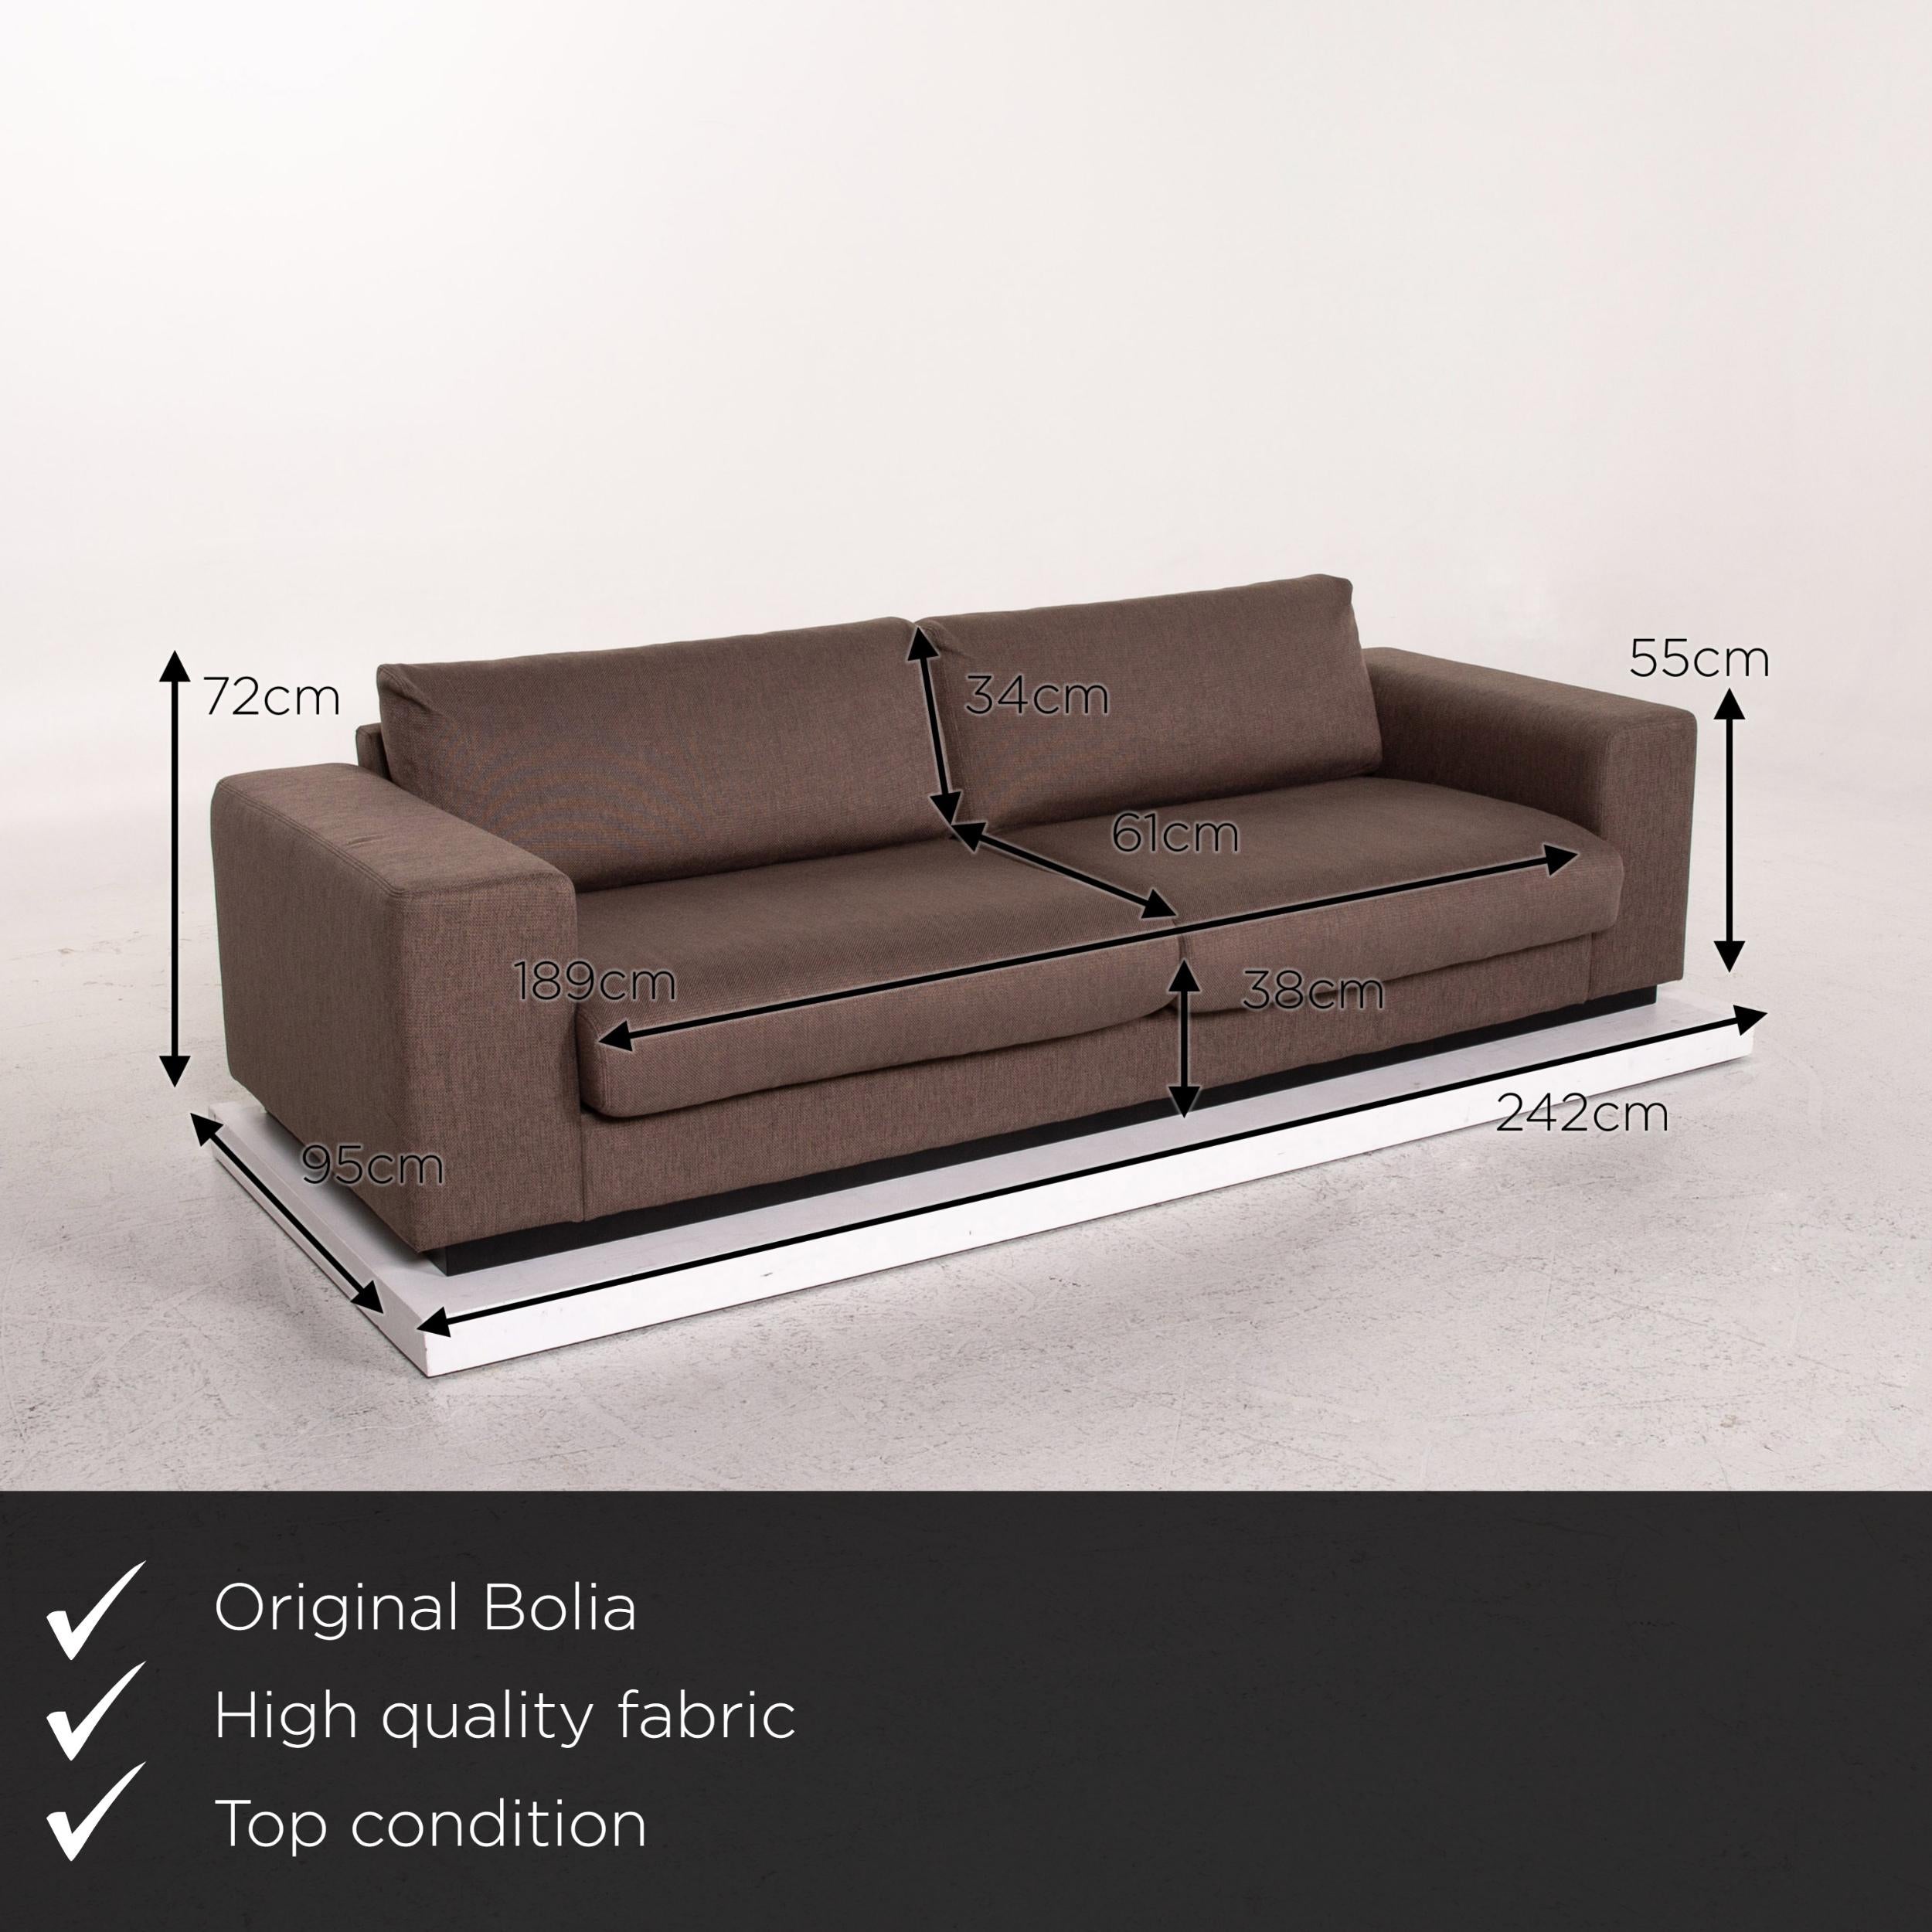 We present to you a Bolia sepia fabric sofa brown three-seat couch.

Product measurements in centimeters:

Depth 95
Width 242
Height 72
Seat height 38
Rest height 55
Seat depth 61
Seat width 189
Back height 34.
 
  
    